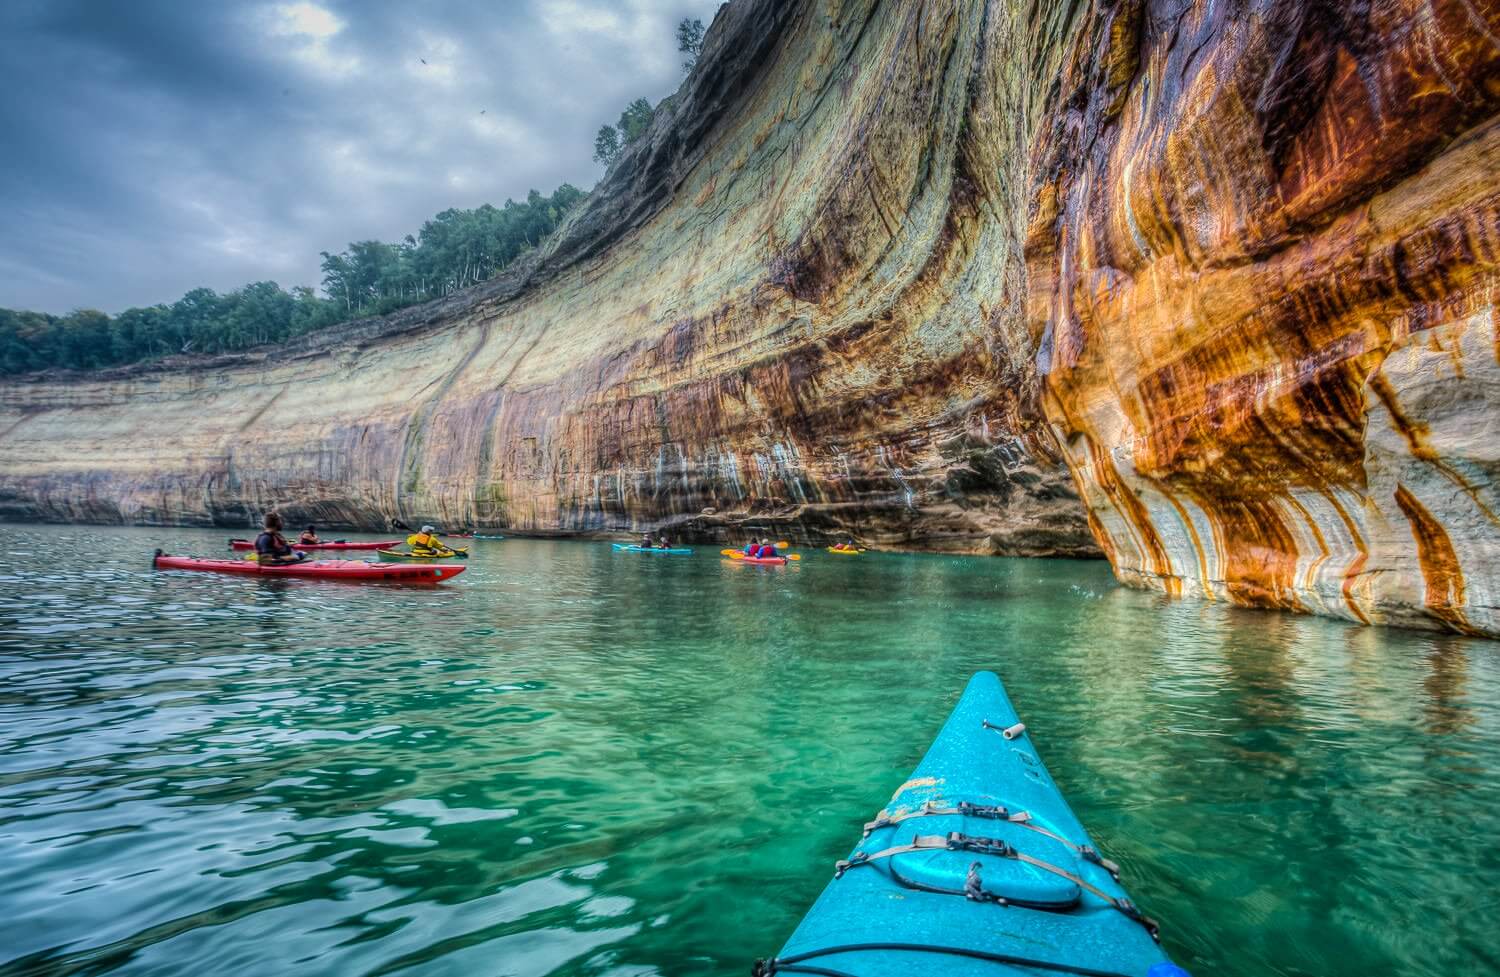 Pictured Rocks National Lakeshore: where to visit in February